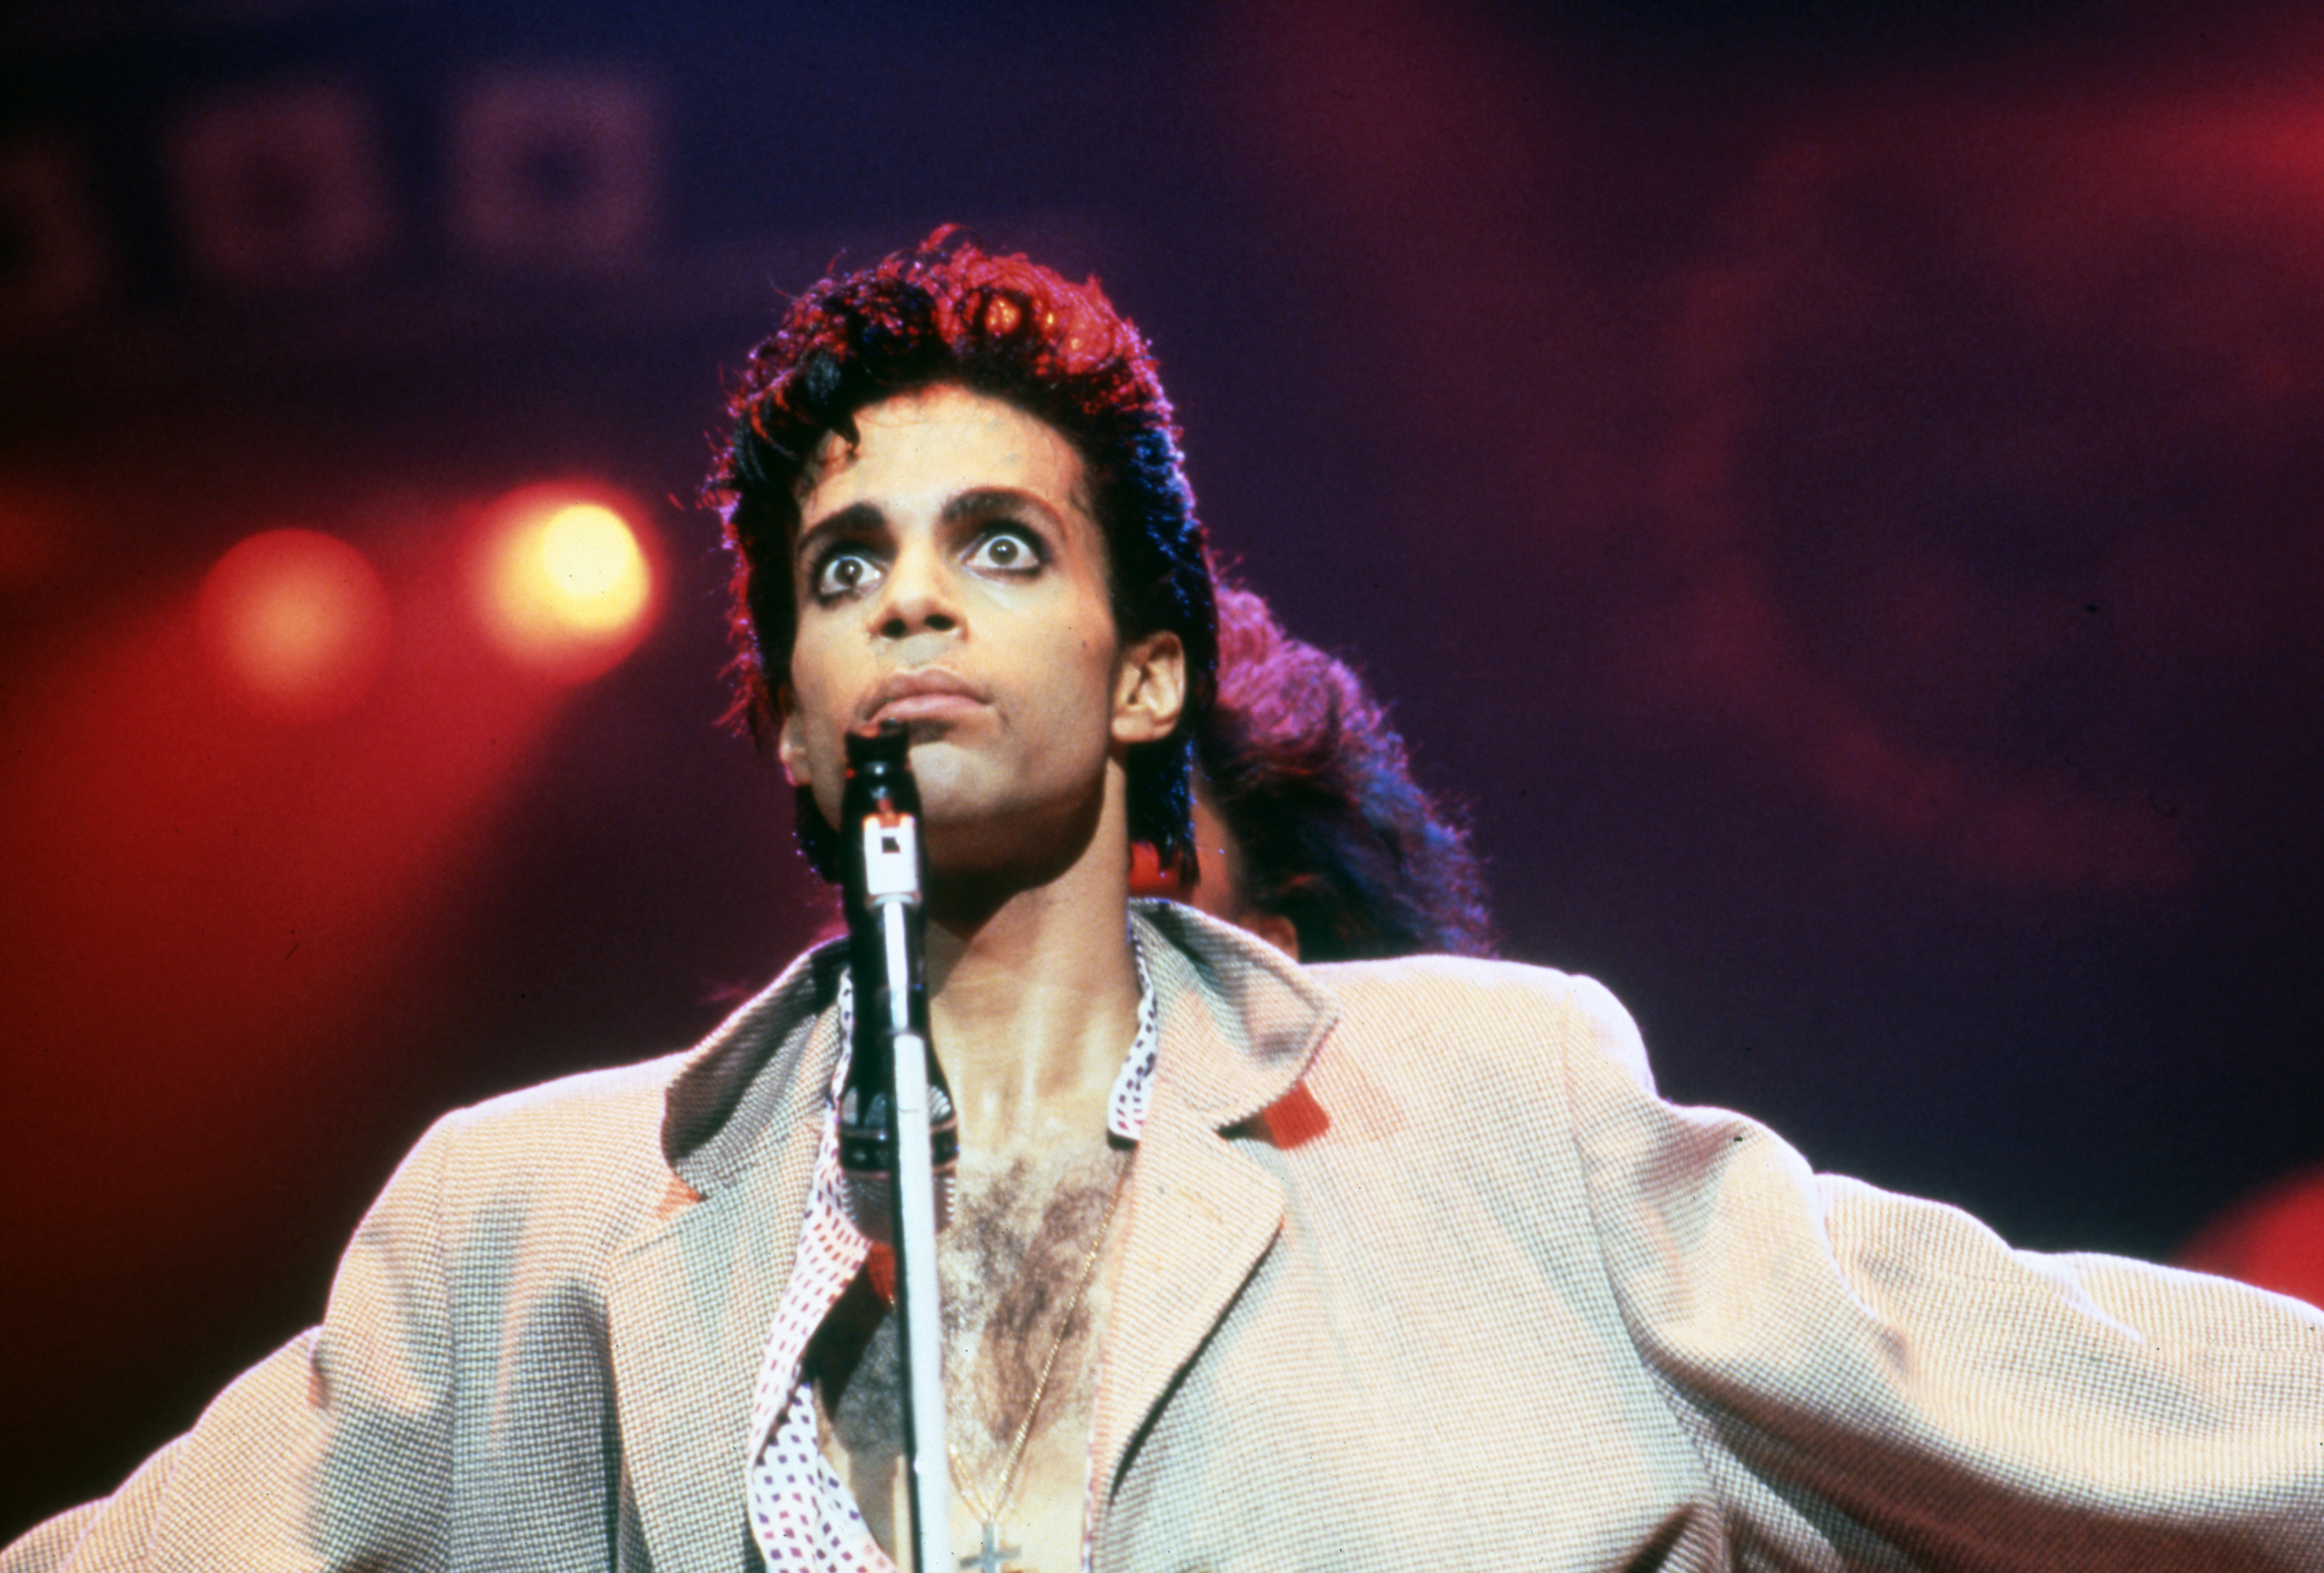 Prince performing onstage during his 1986 Parade Tour on June 7, 1986 in Detroit, Michigan | Source: Getty Images